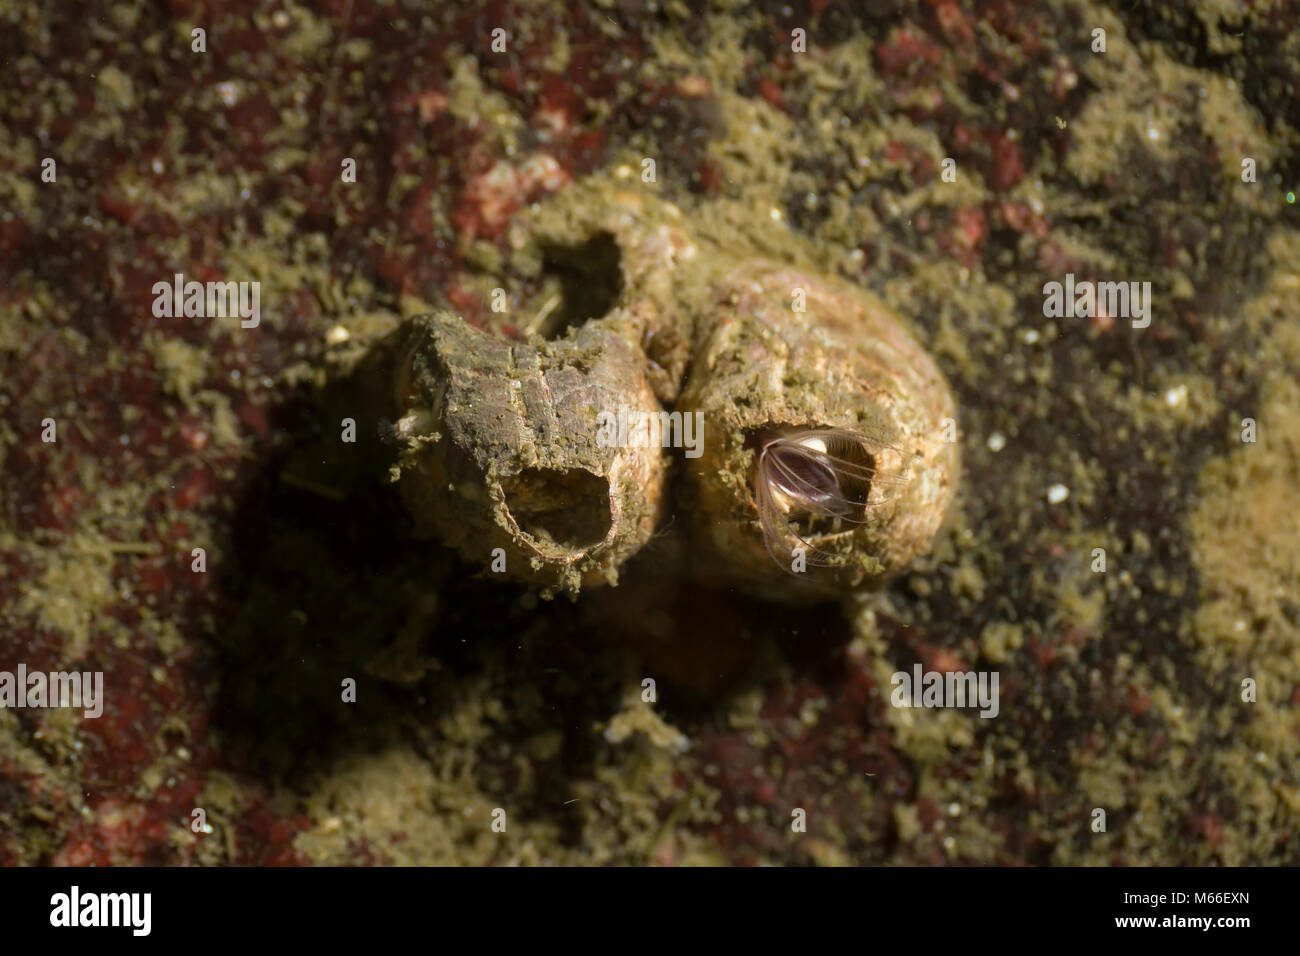 Macro underwater picture of a couple of Barnacles in Howe Sound, British Columbia, Canada. Stock Photo